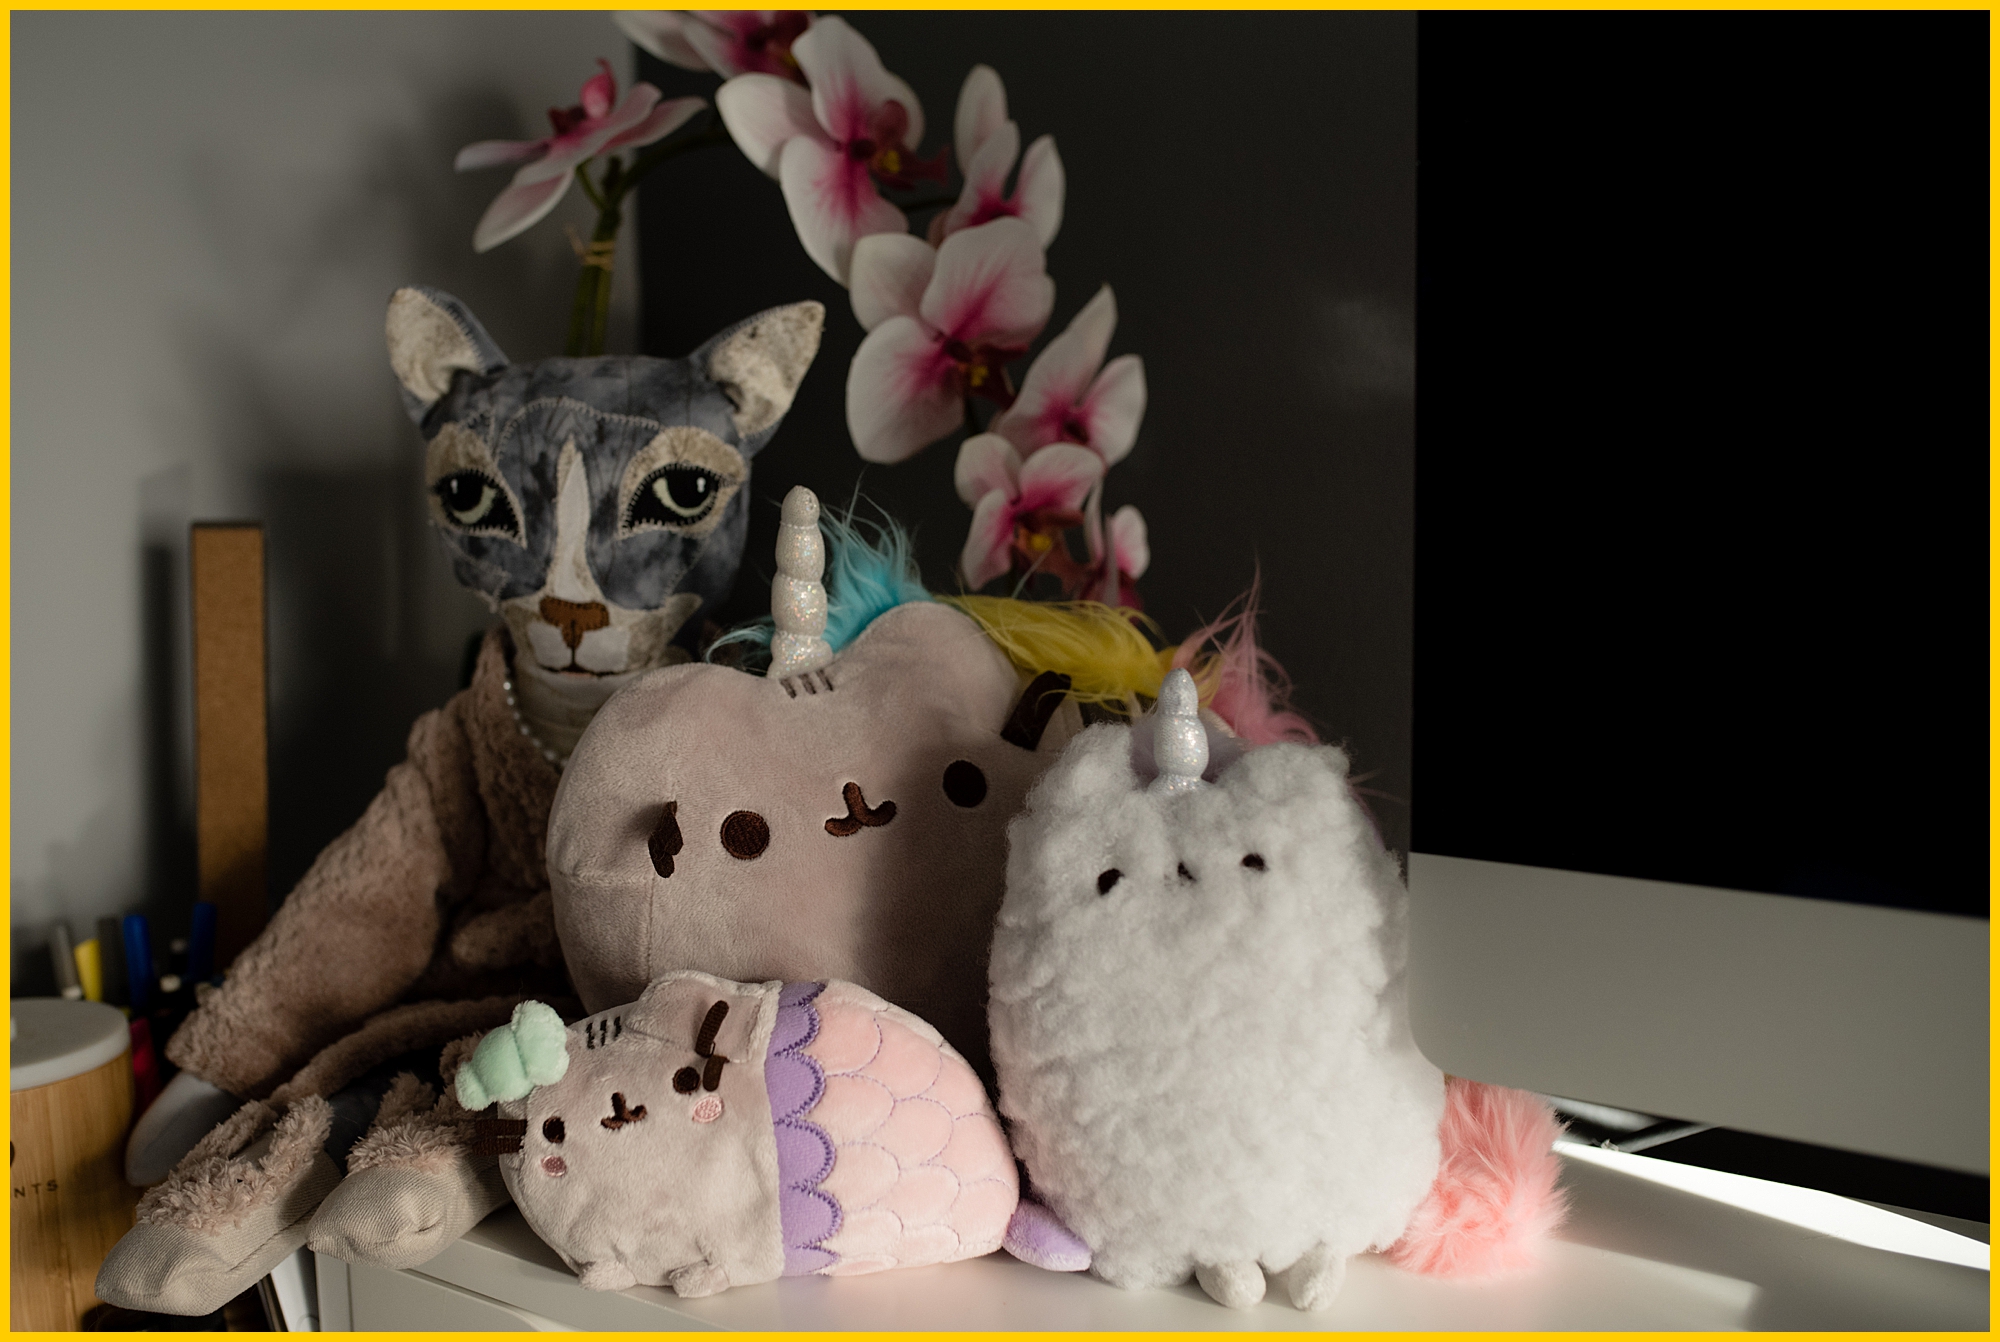 starting a successful photography business includes having a pile of plushies on your desk, obviously.